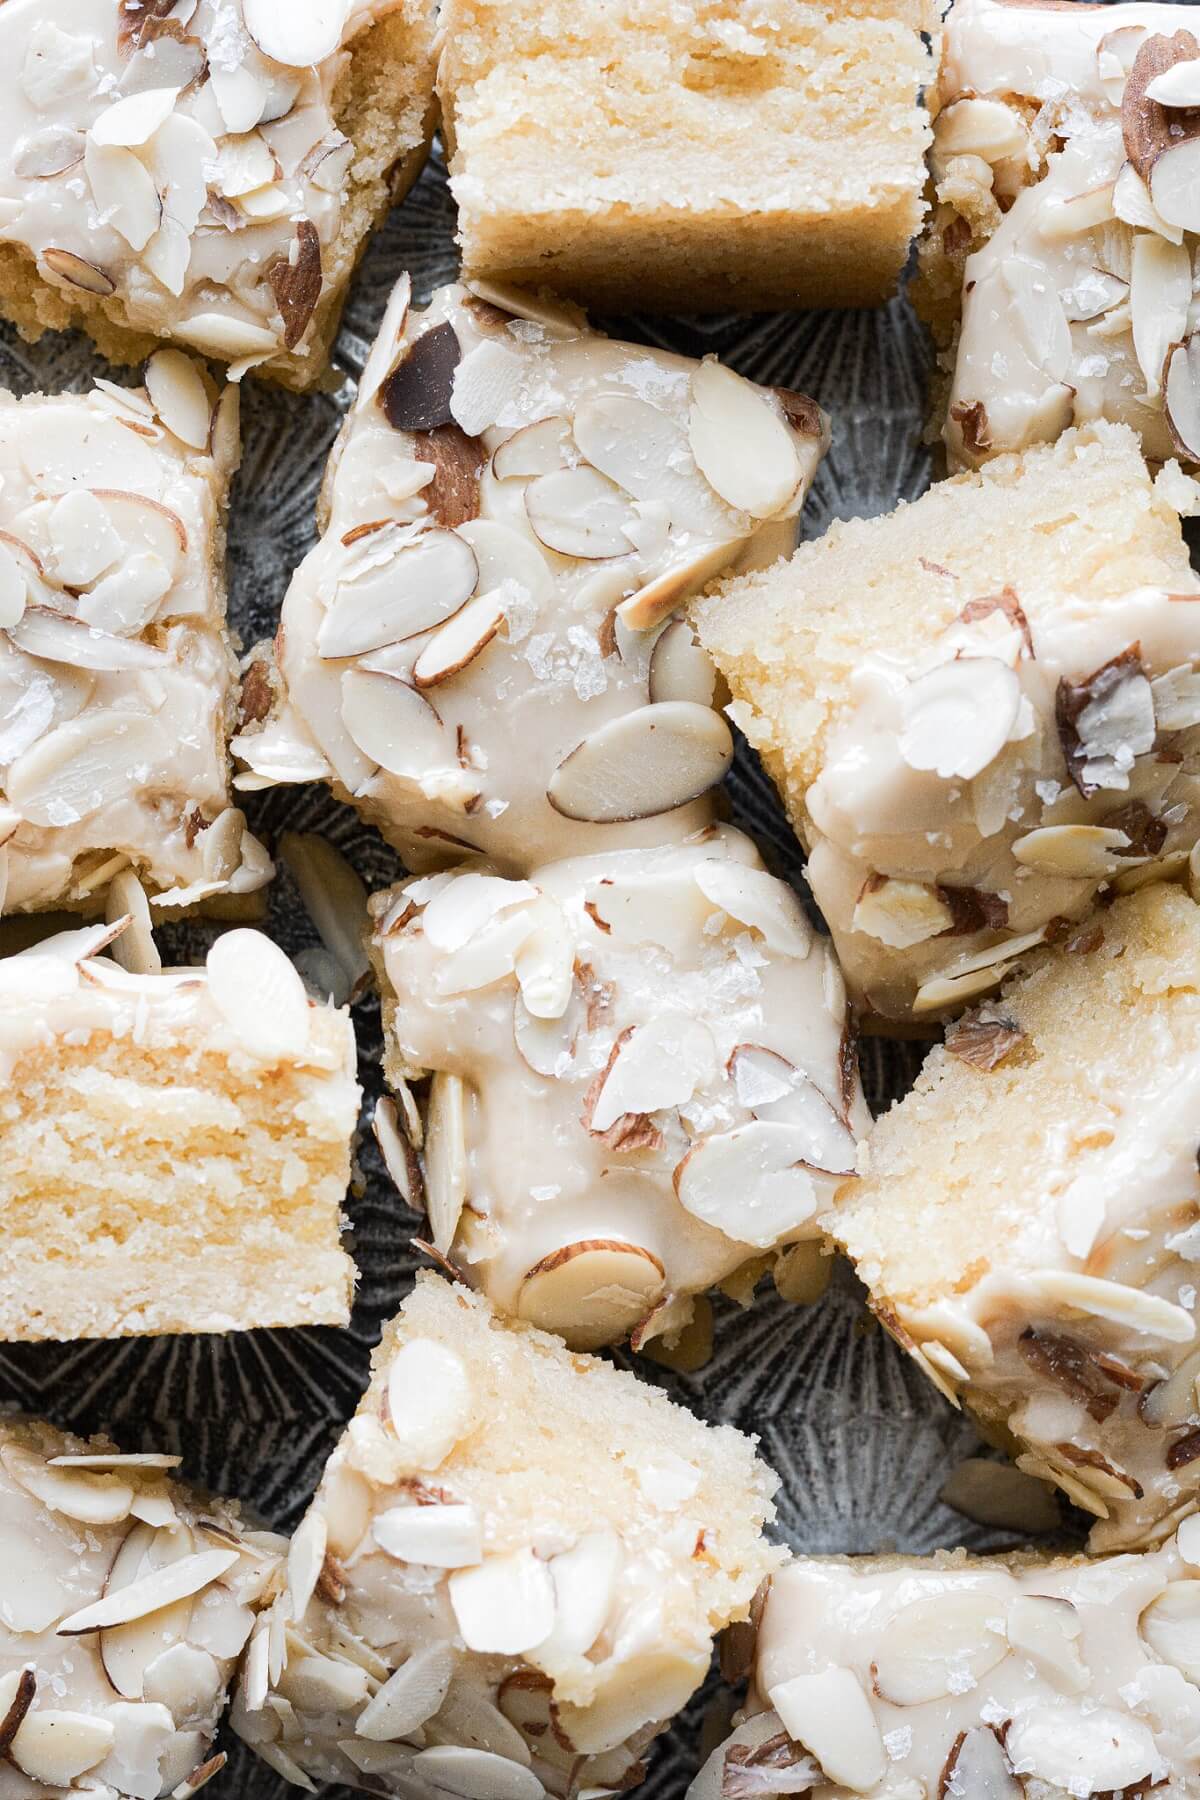 Almond amaretto bars with amaretto icing and sliced almonds on top.